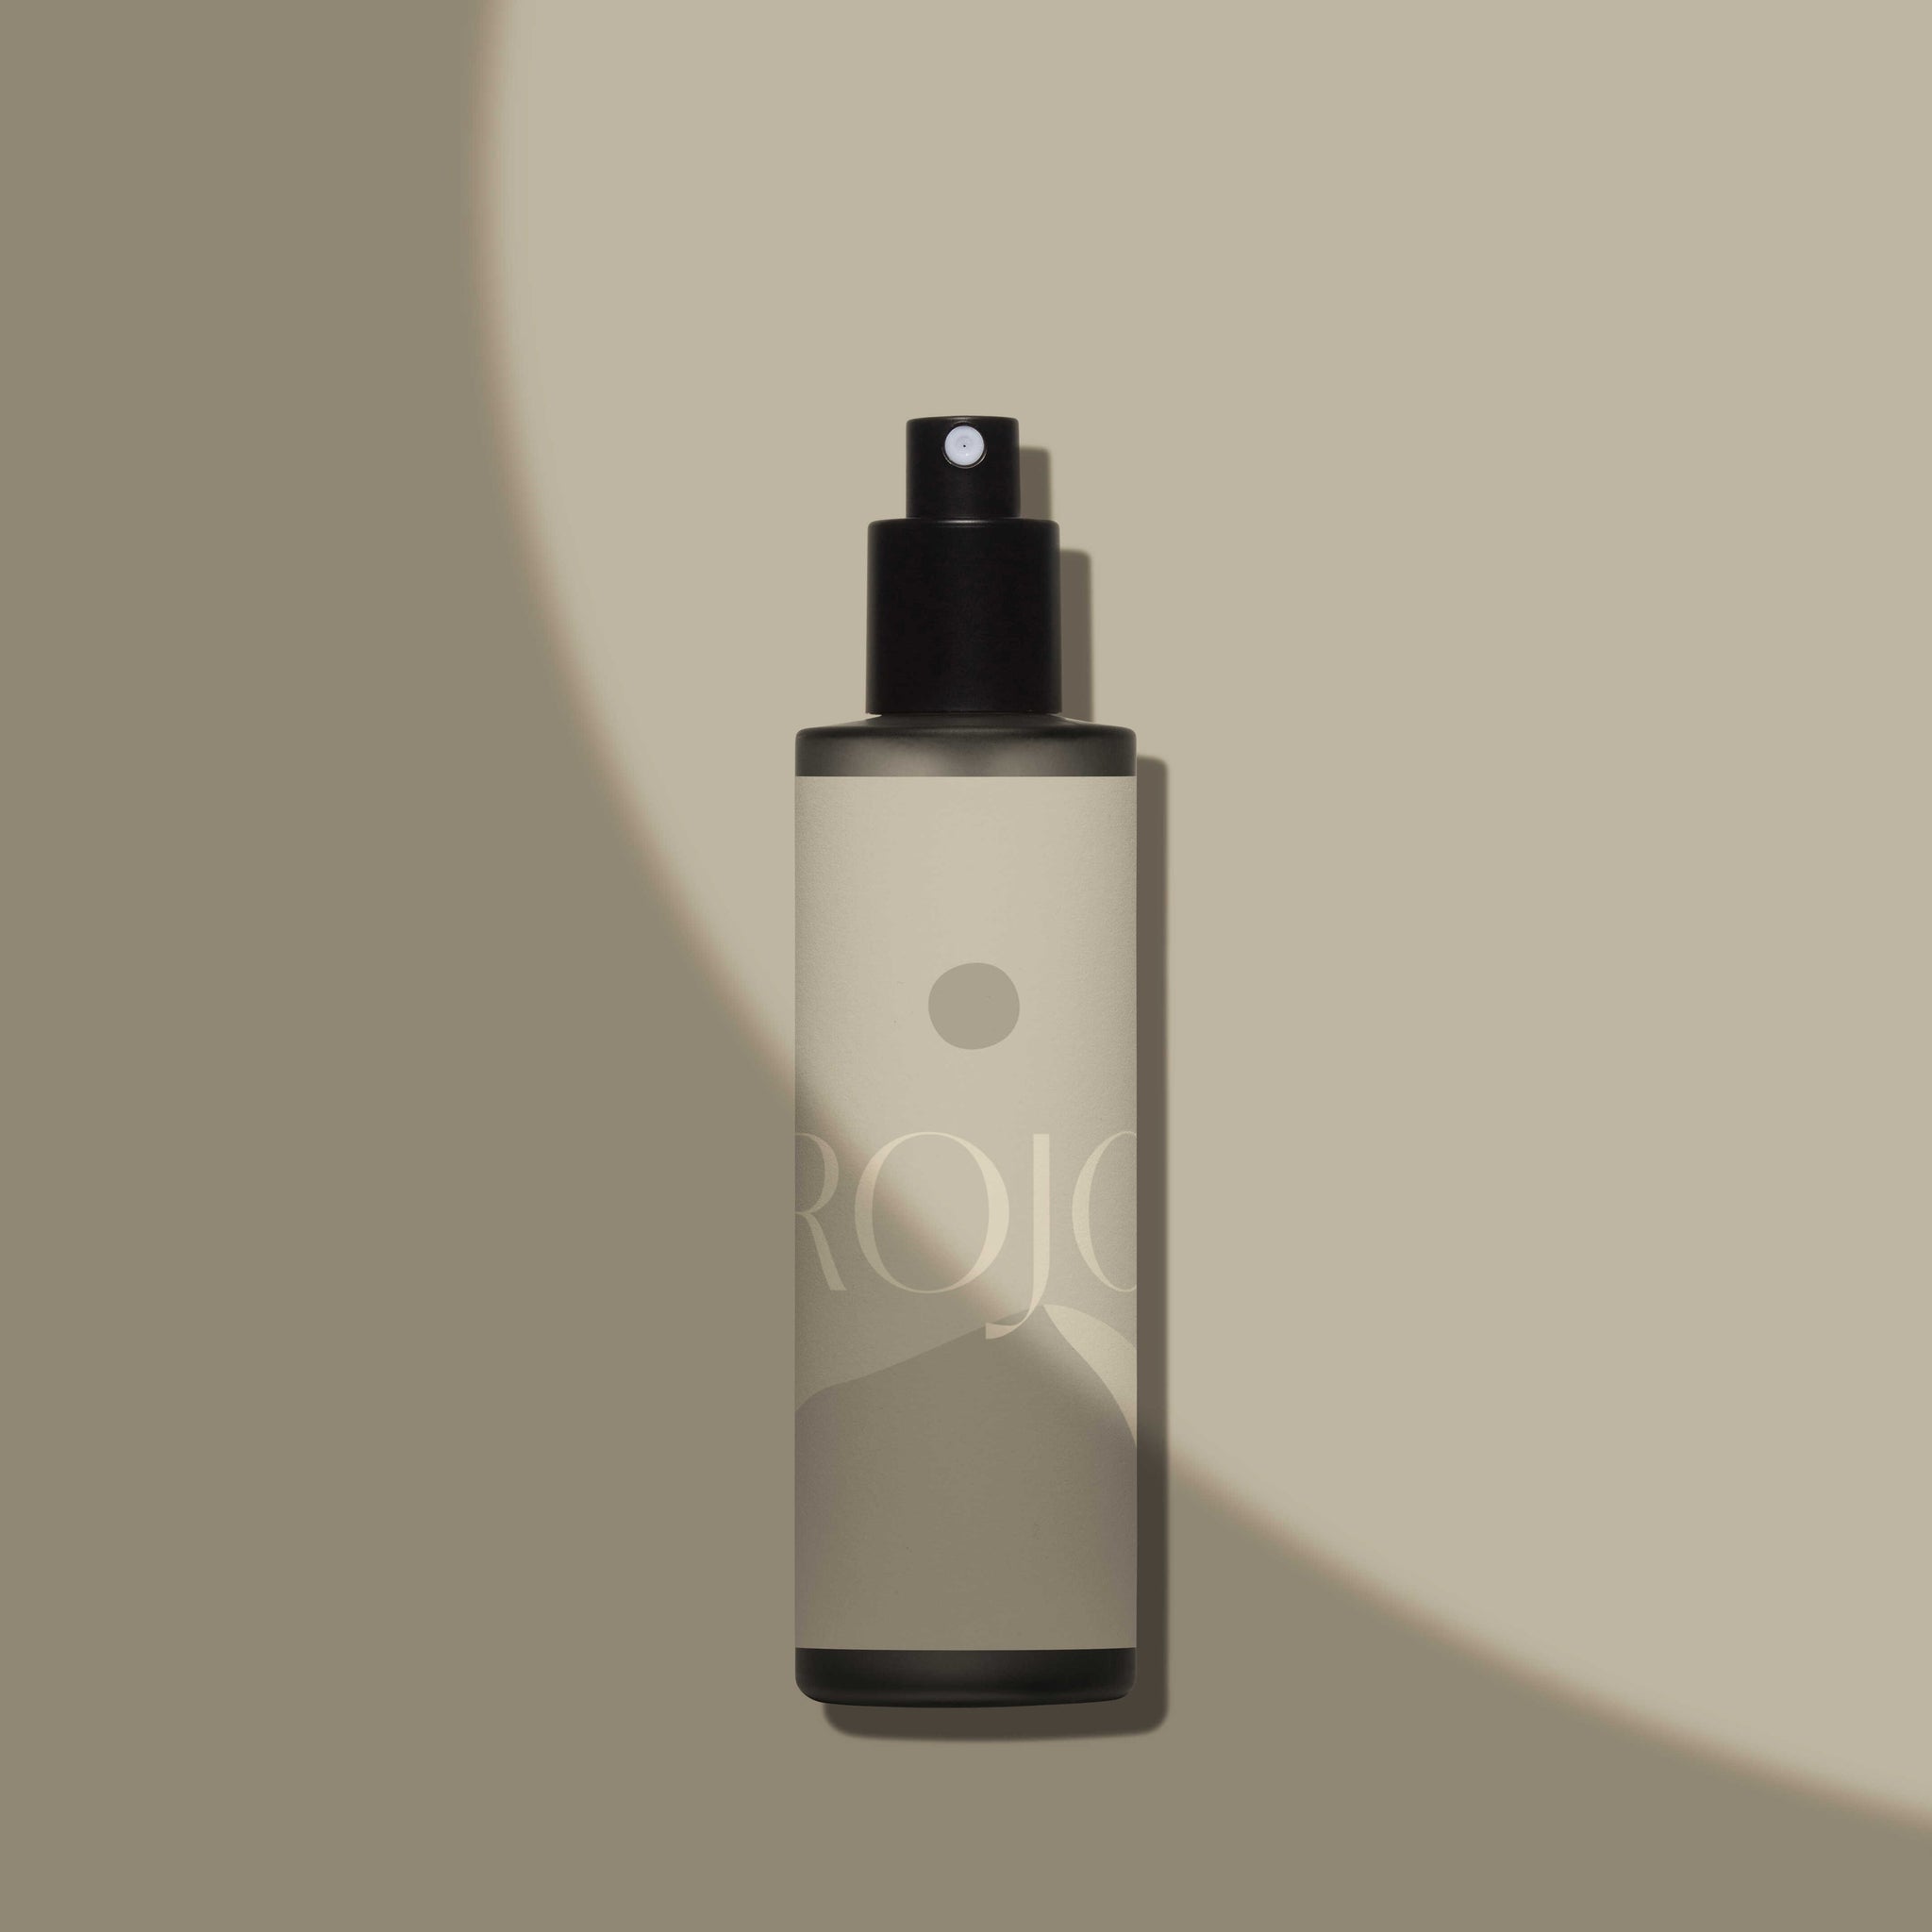 Frosted Glass Cosmetic Bottle No. 4 - Copal Studio Packaging Mockups For Designers